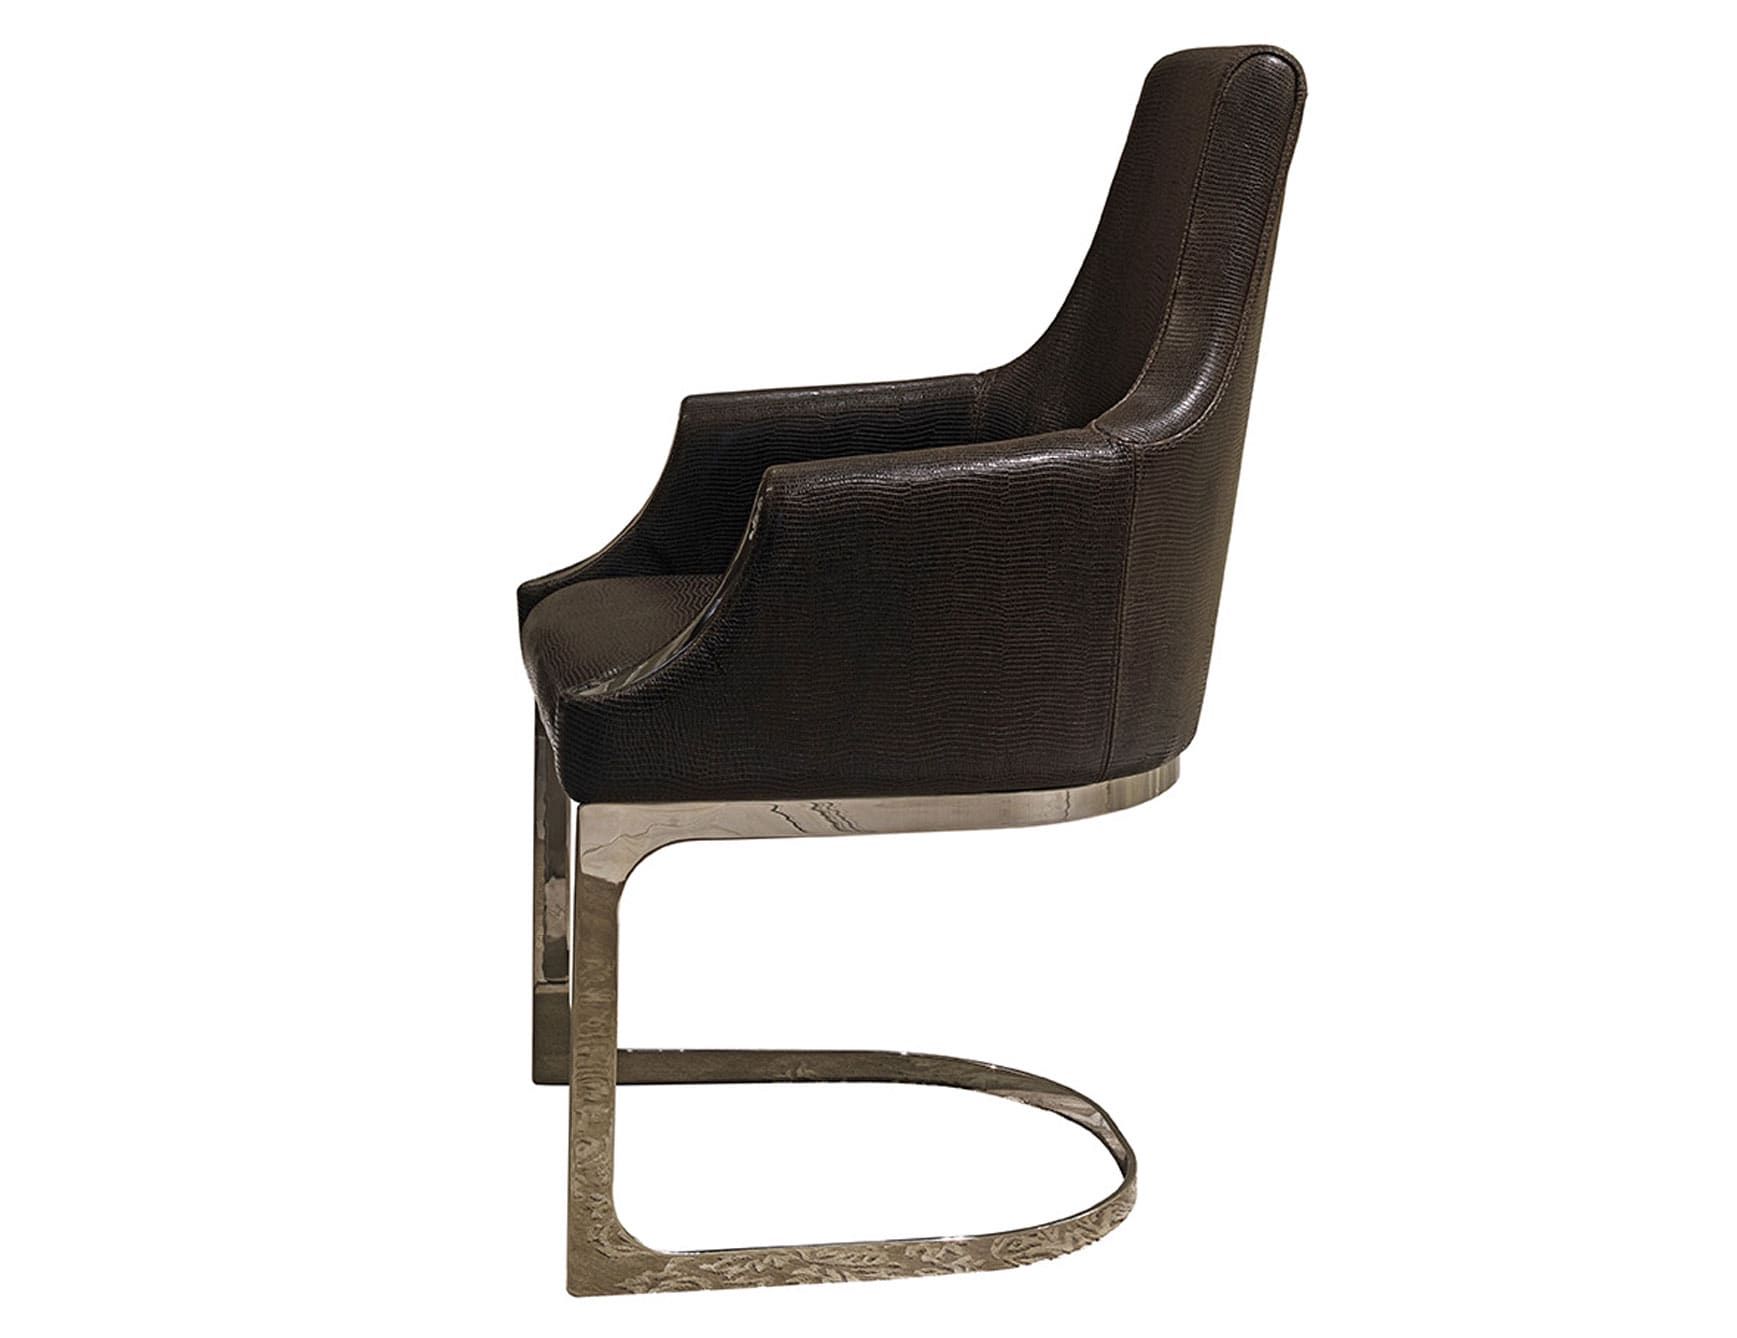 Janas modern luxury chair with brown leather